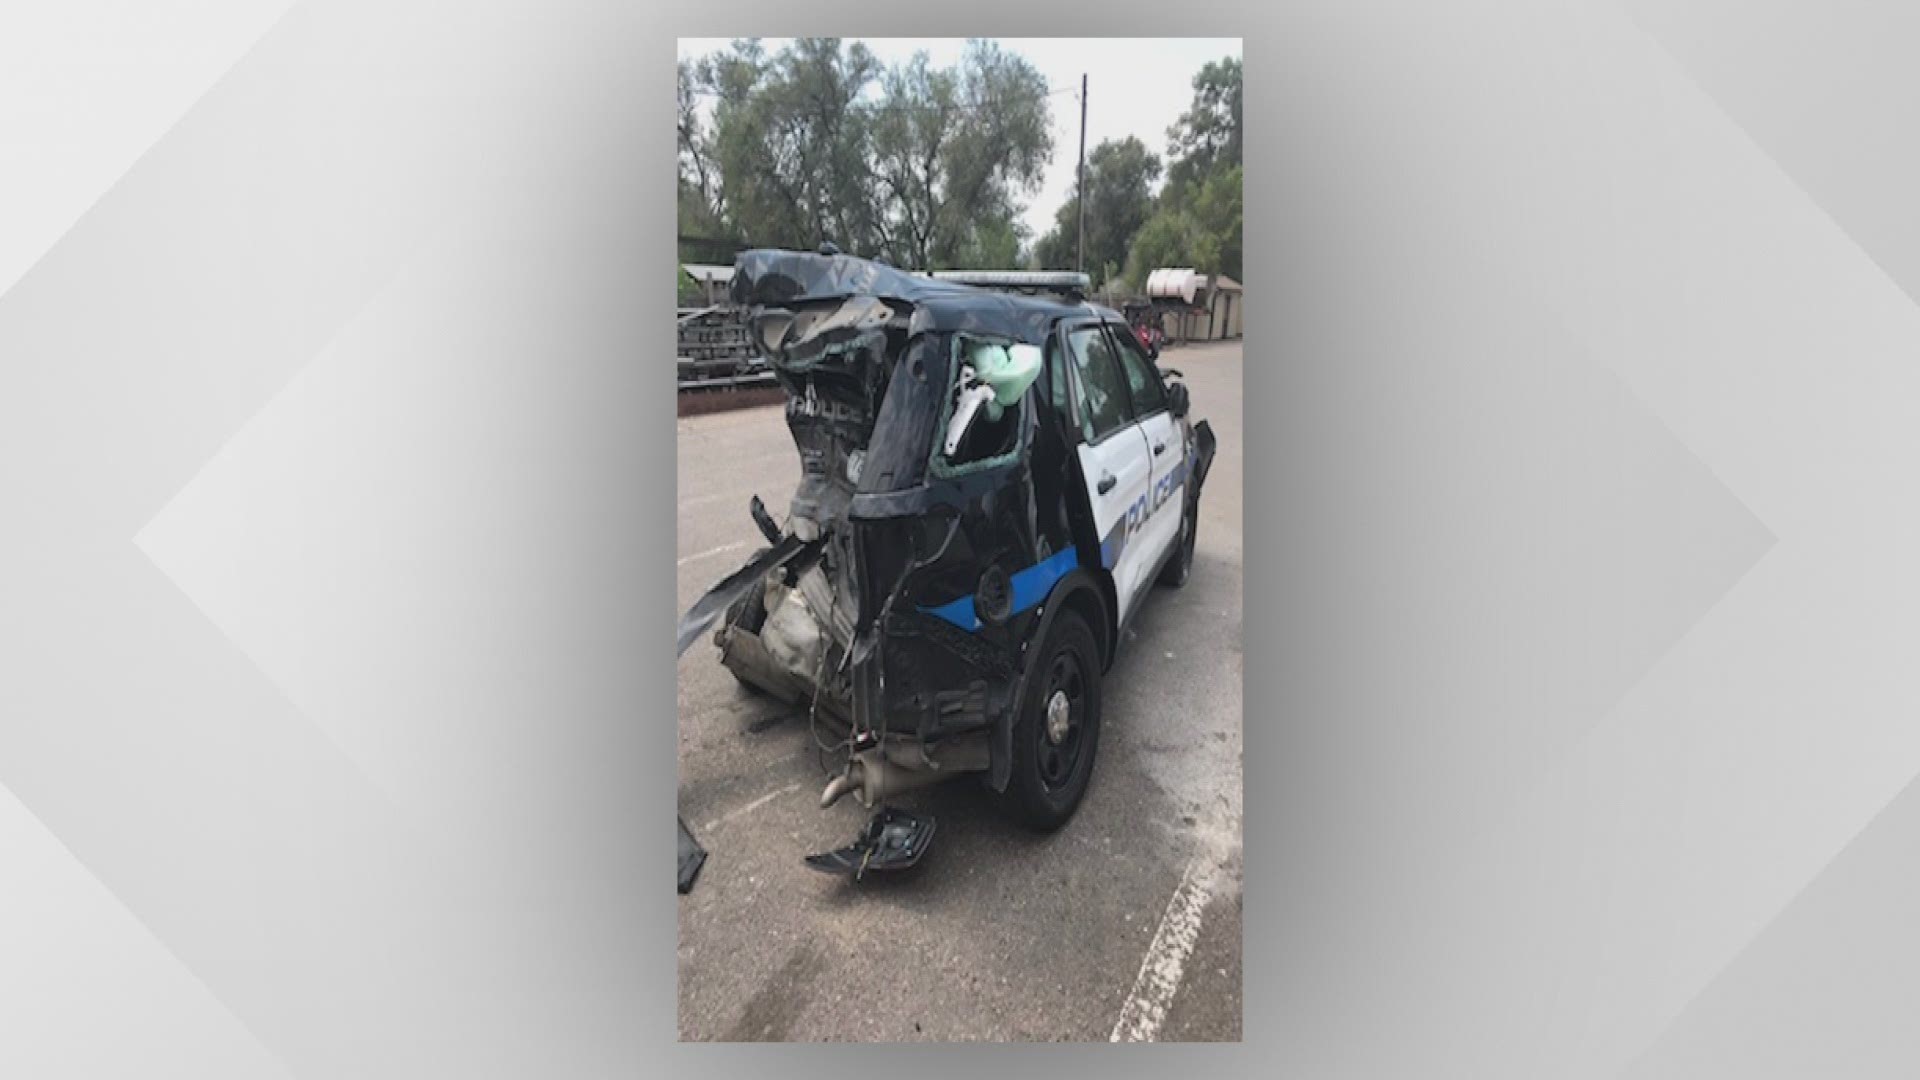 Mathew Paul, 44, who was driving the pickup, sustained minor injuries and was transported to an area hospital. Alcohol is suspected in the crash, according to police